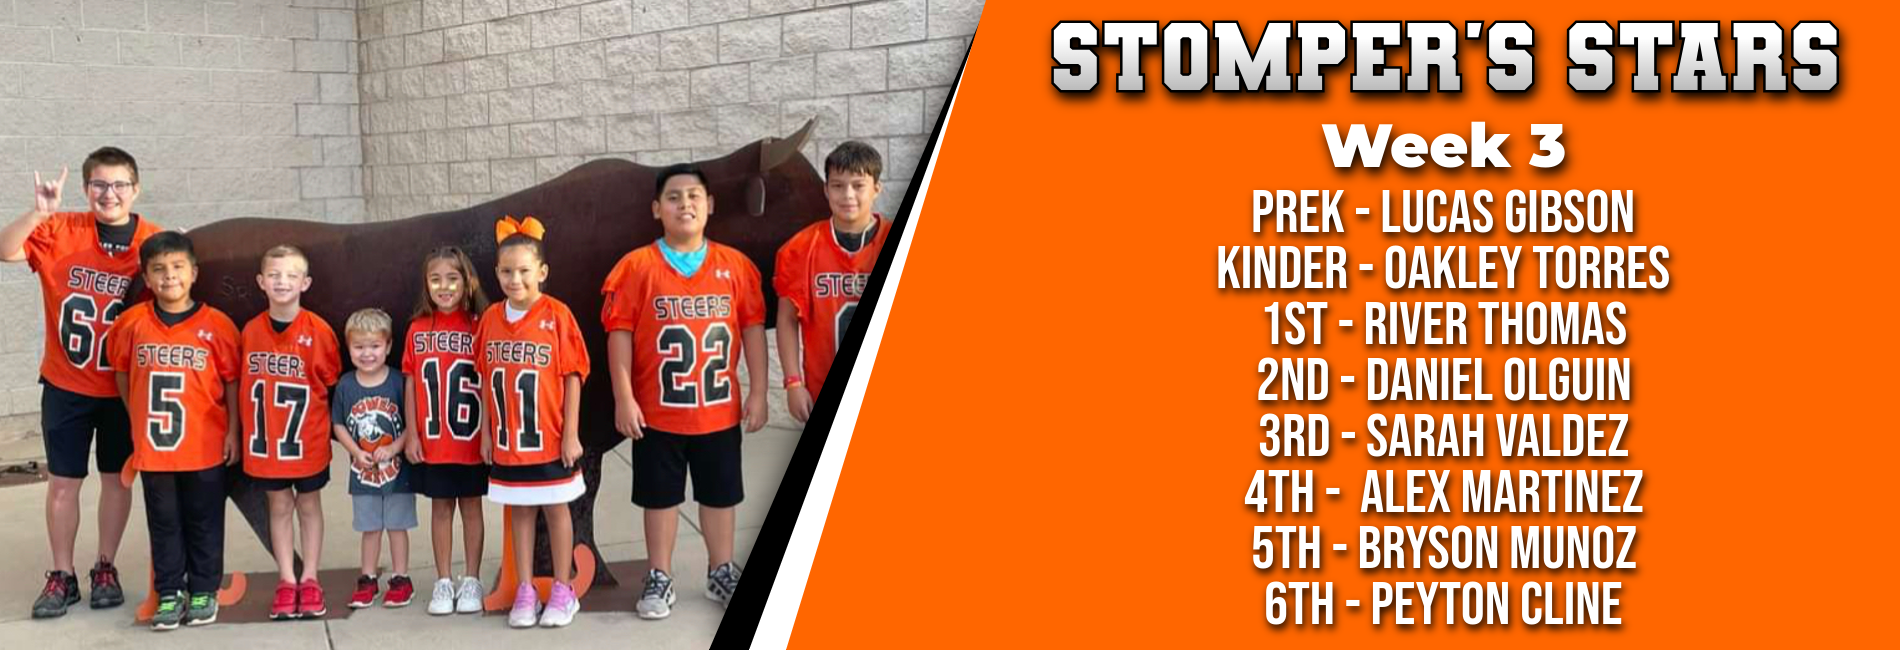 Stompers Stars for week 3